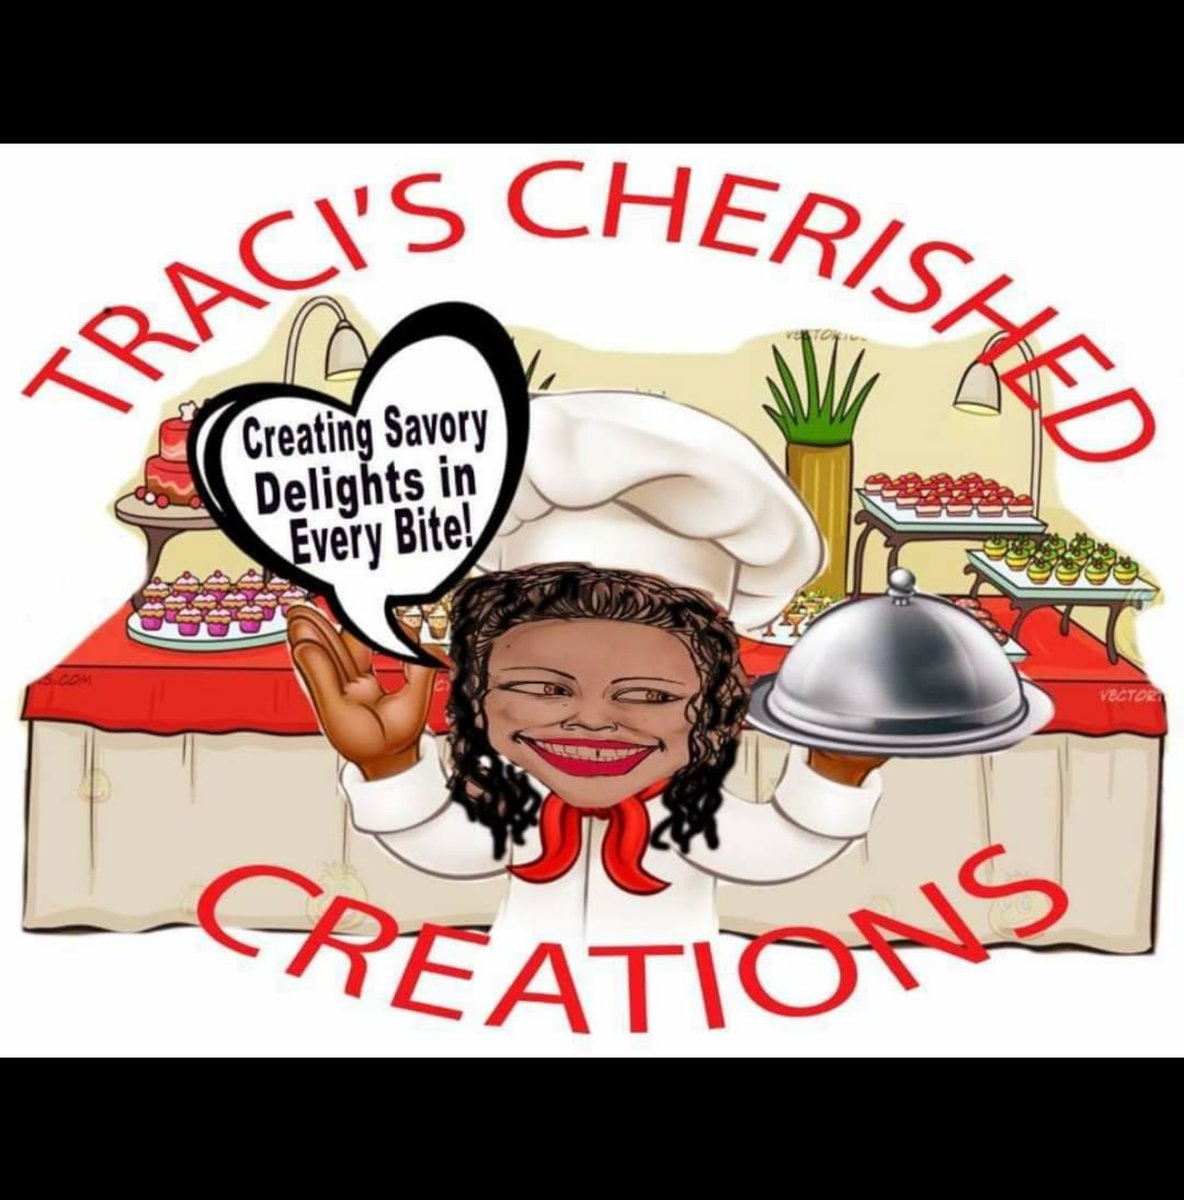 Traci's Cherished Creations is a food truck located on Fairfield Dr. Support her. 
Learn More: bantucola.com/listing/tracis…

#blackowned #blackbusiness #buyblack #spend$20 #showyourreceipts #supportblackbusiness #local #gulfcoast #groupeconomics